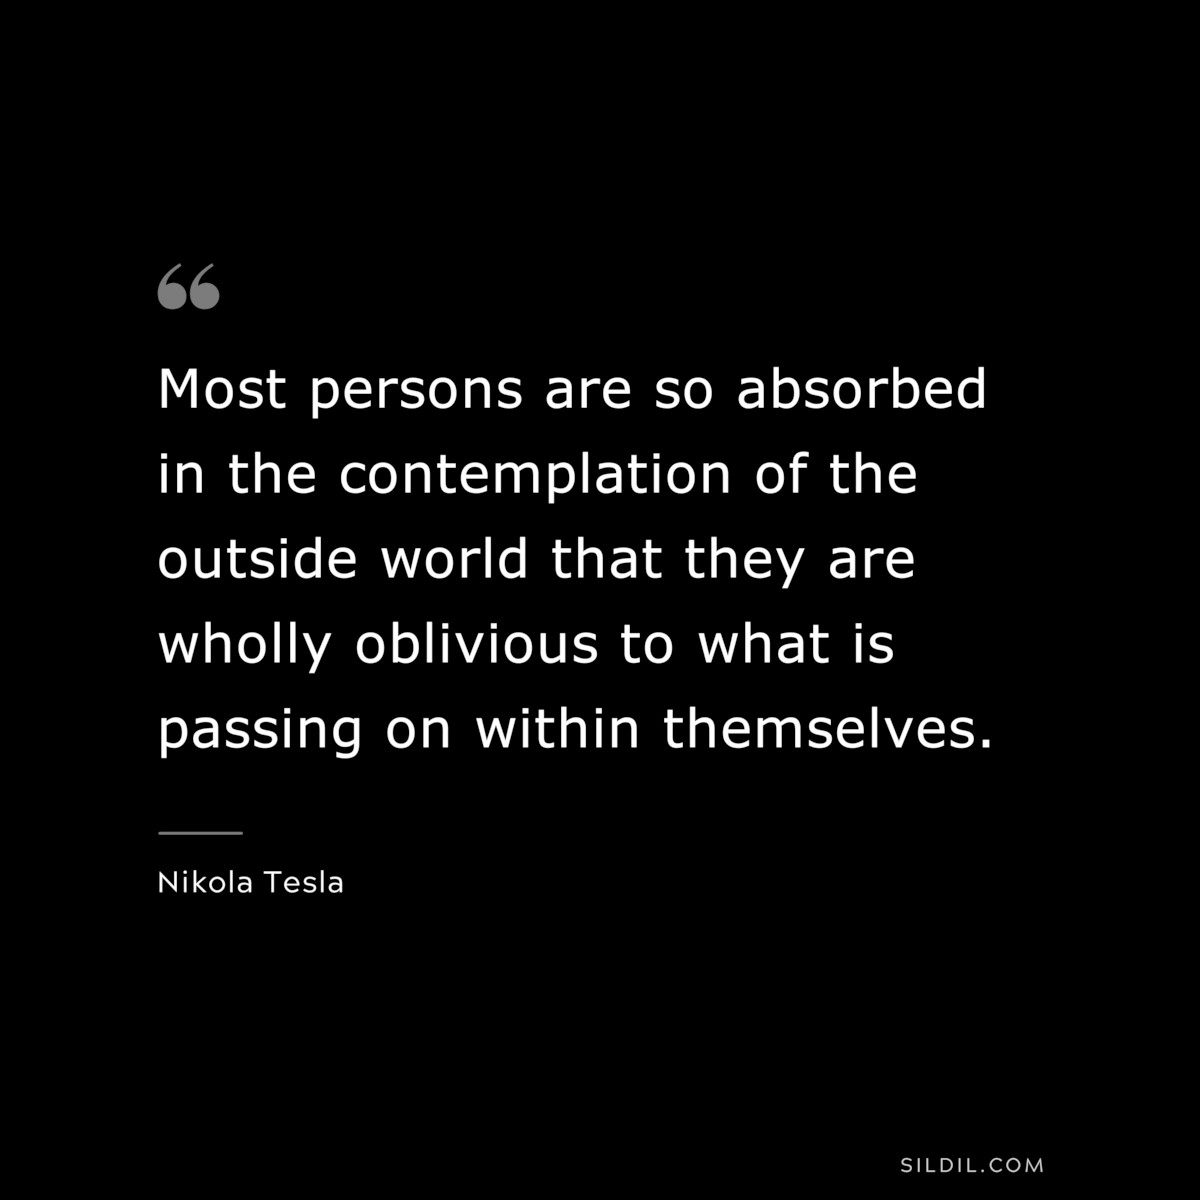 Most persons are so absorbed in the contemplation of the outside world that they are wholly oblivious to what is passing on within themselves. ― Nikola Tesla